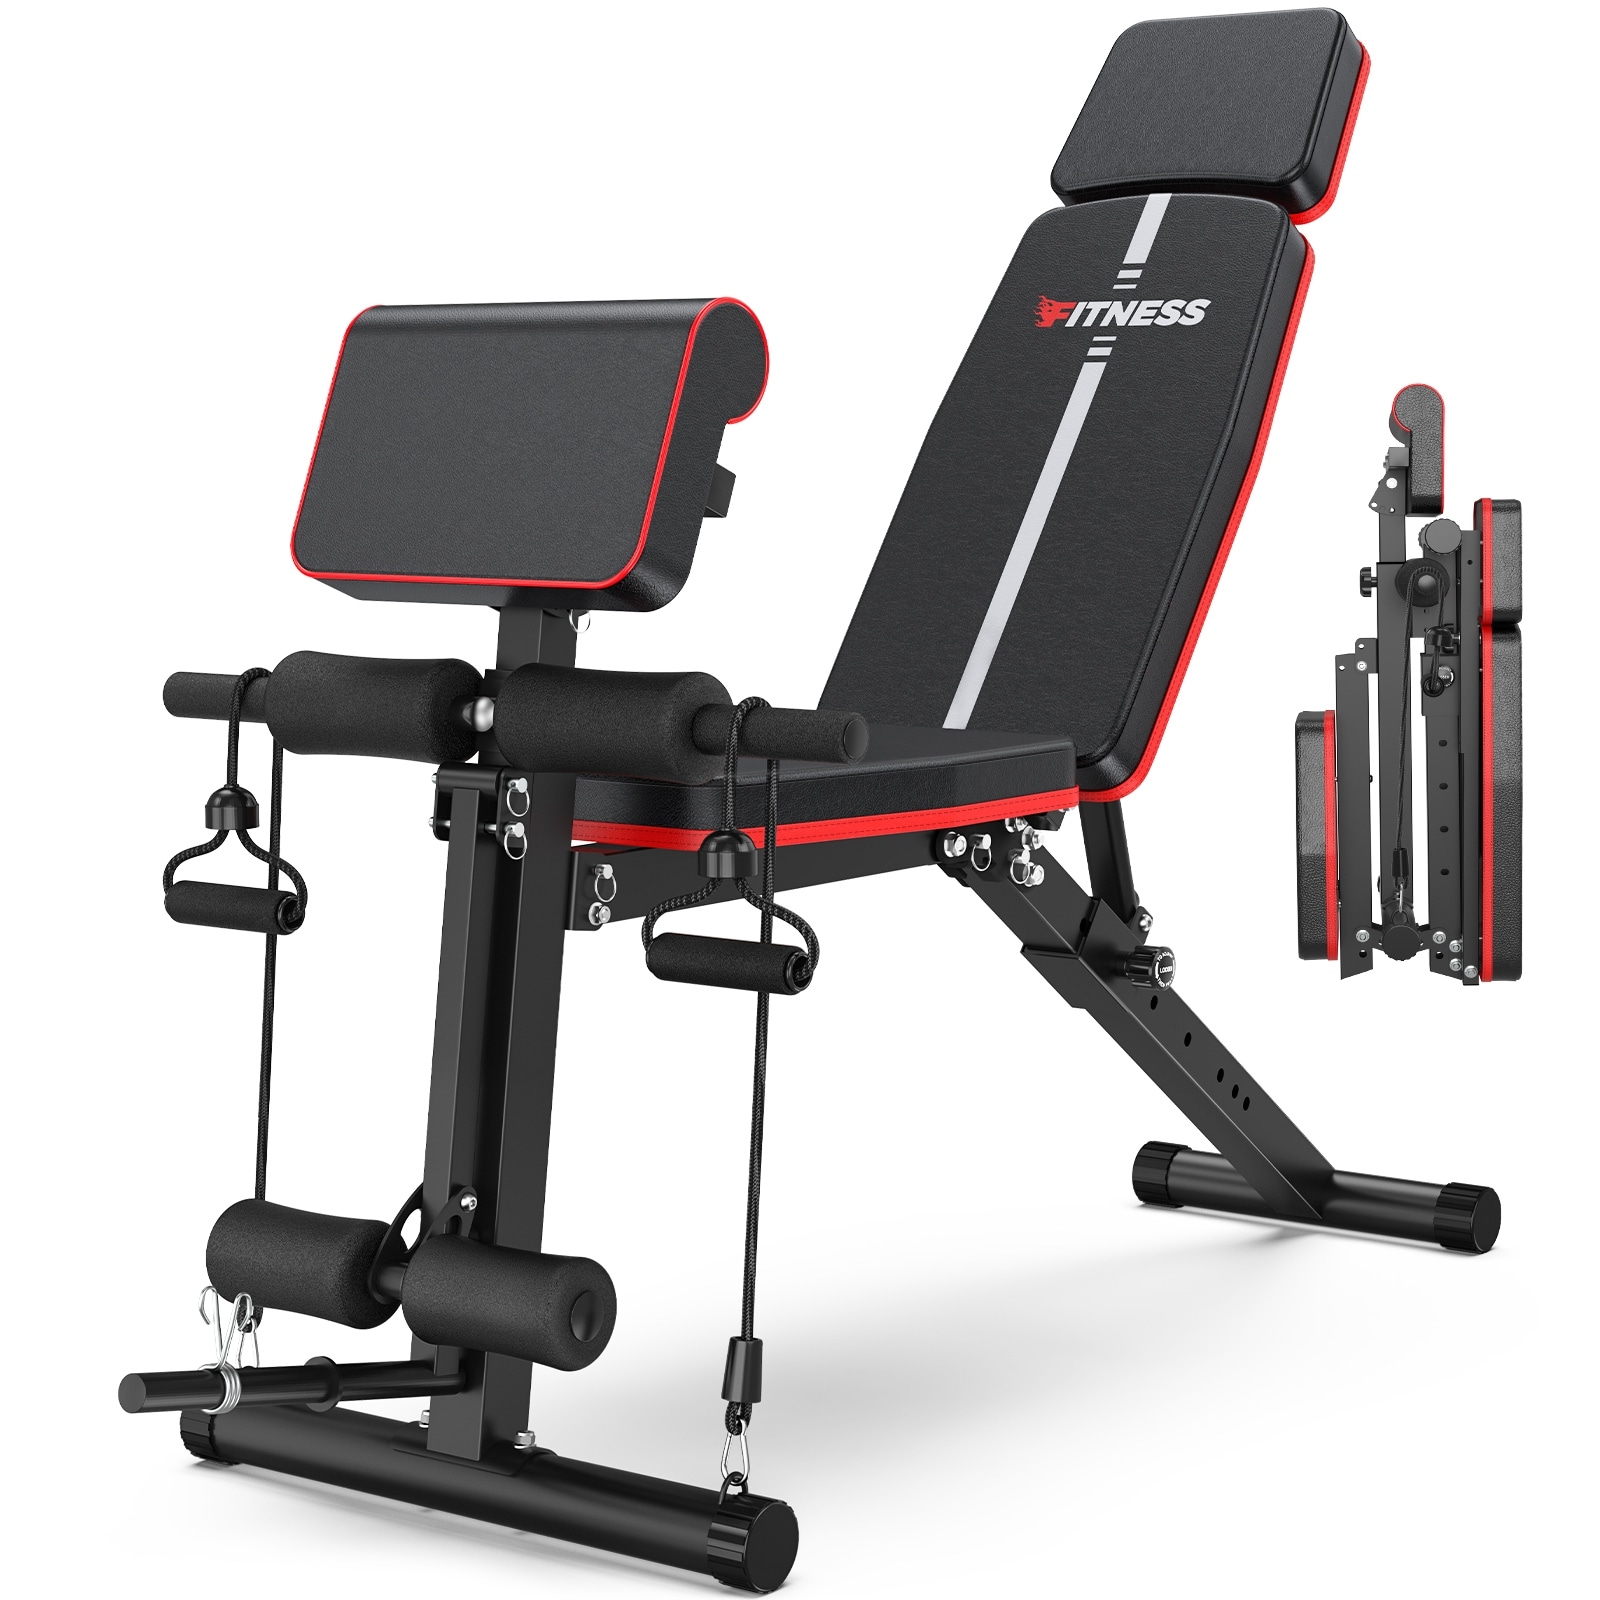 Weight Benches - Bed Bath & Beyond